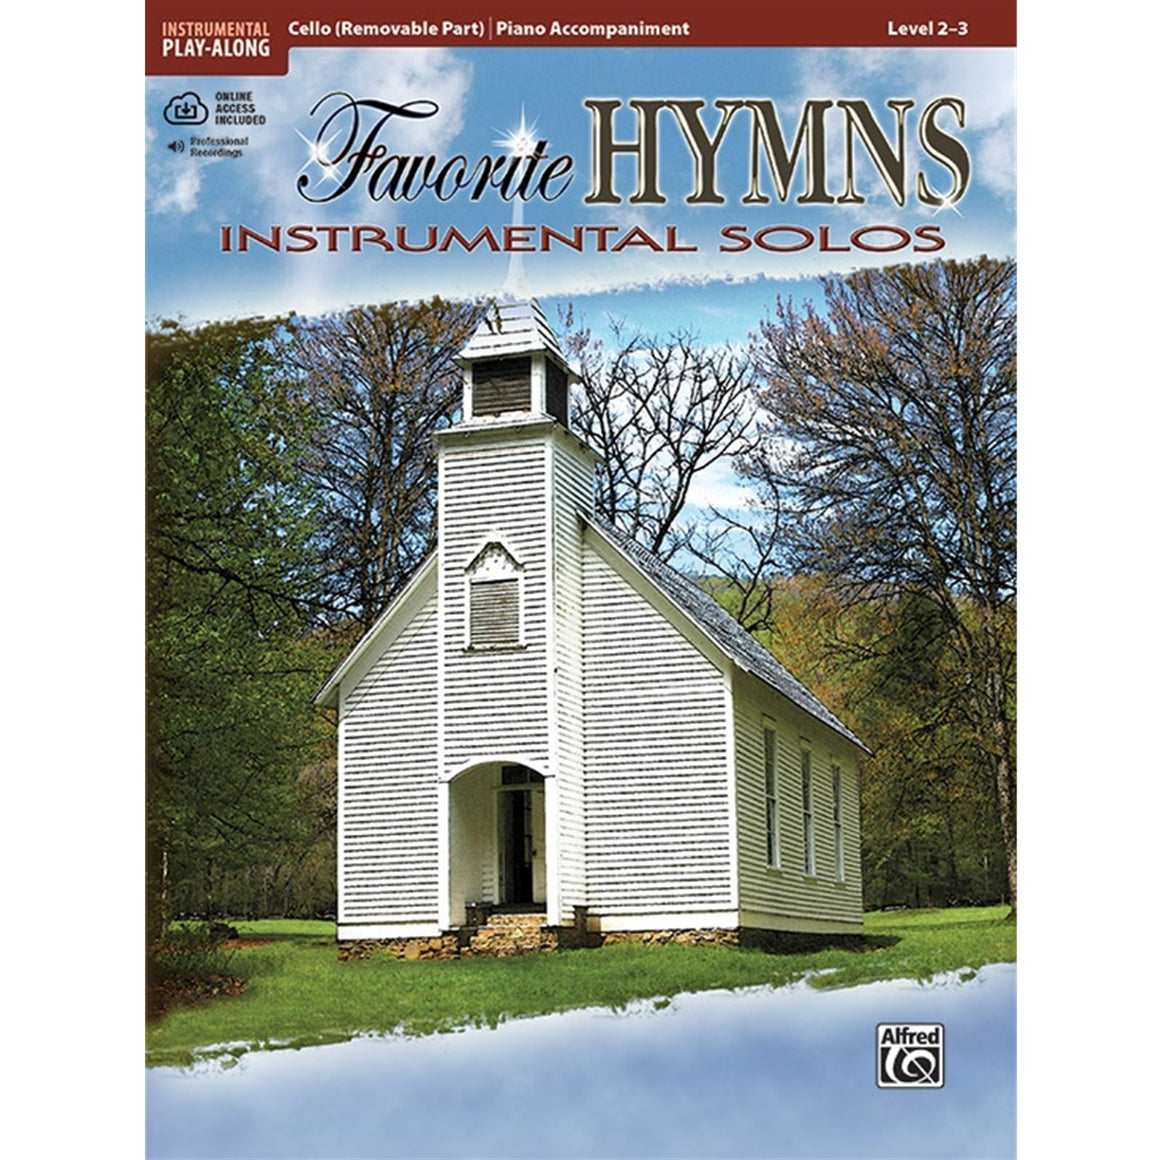 ALFRED 36139 Favorite Hymns Instrumental Solos for Cello